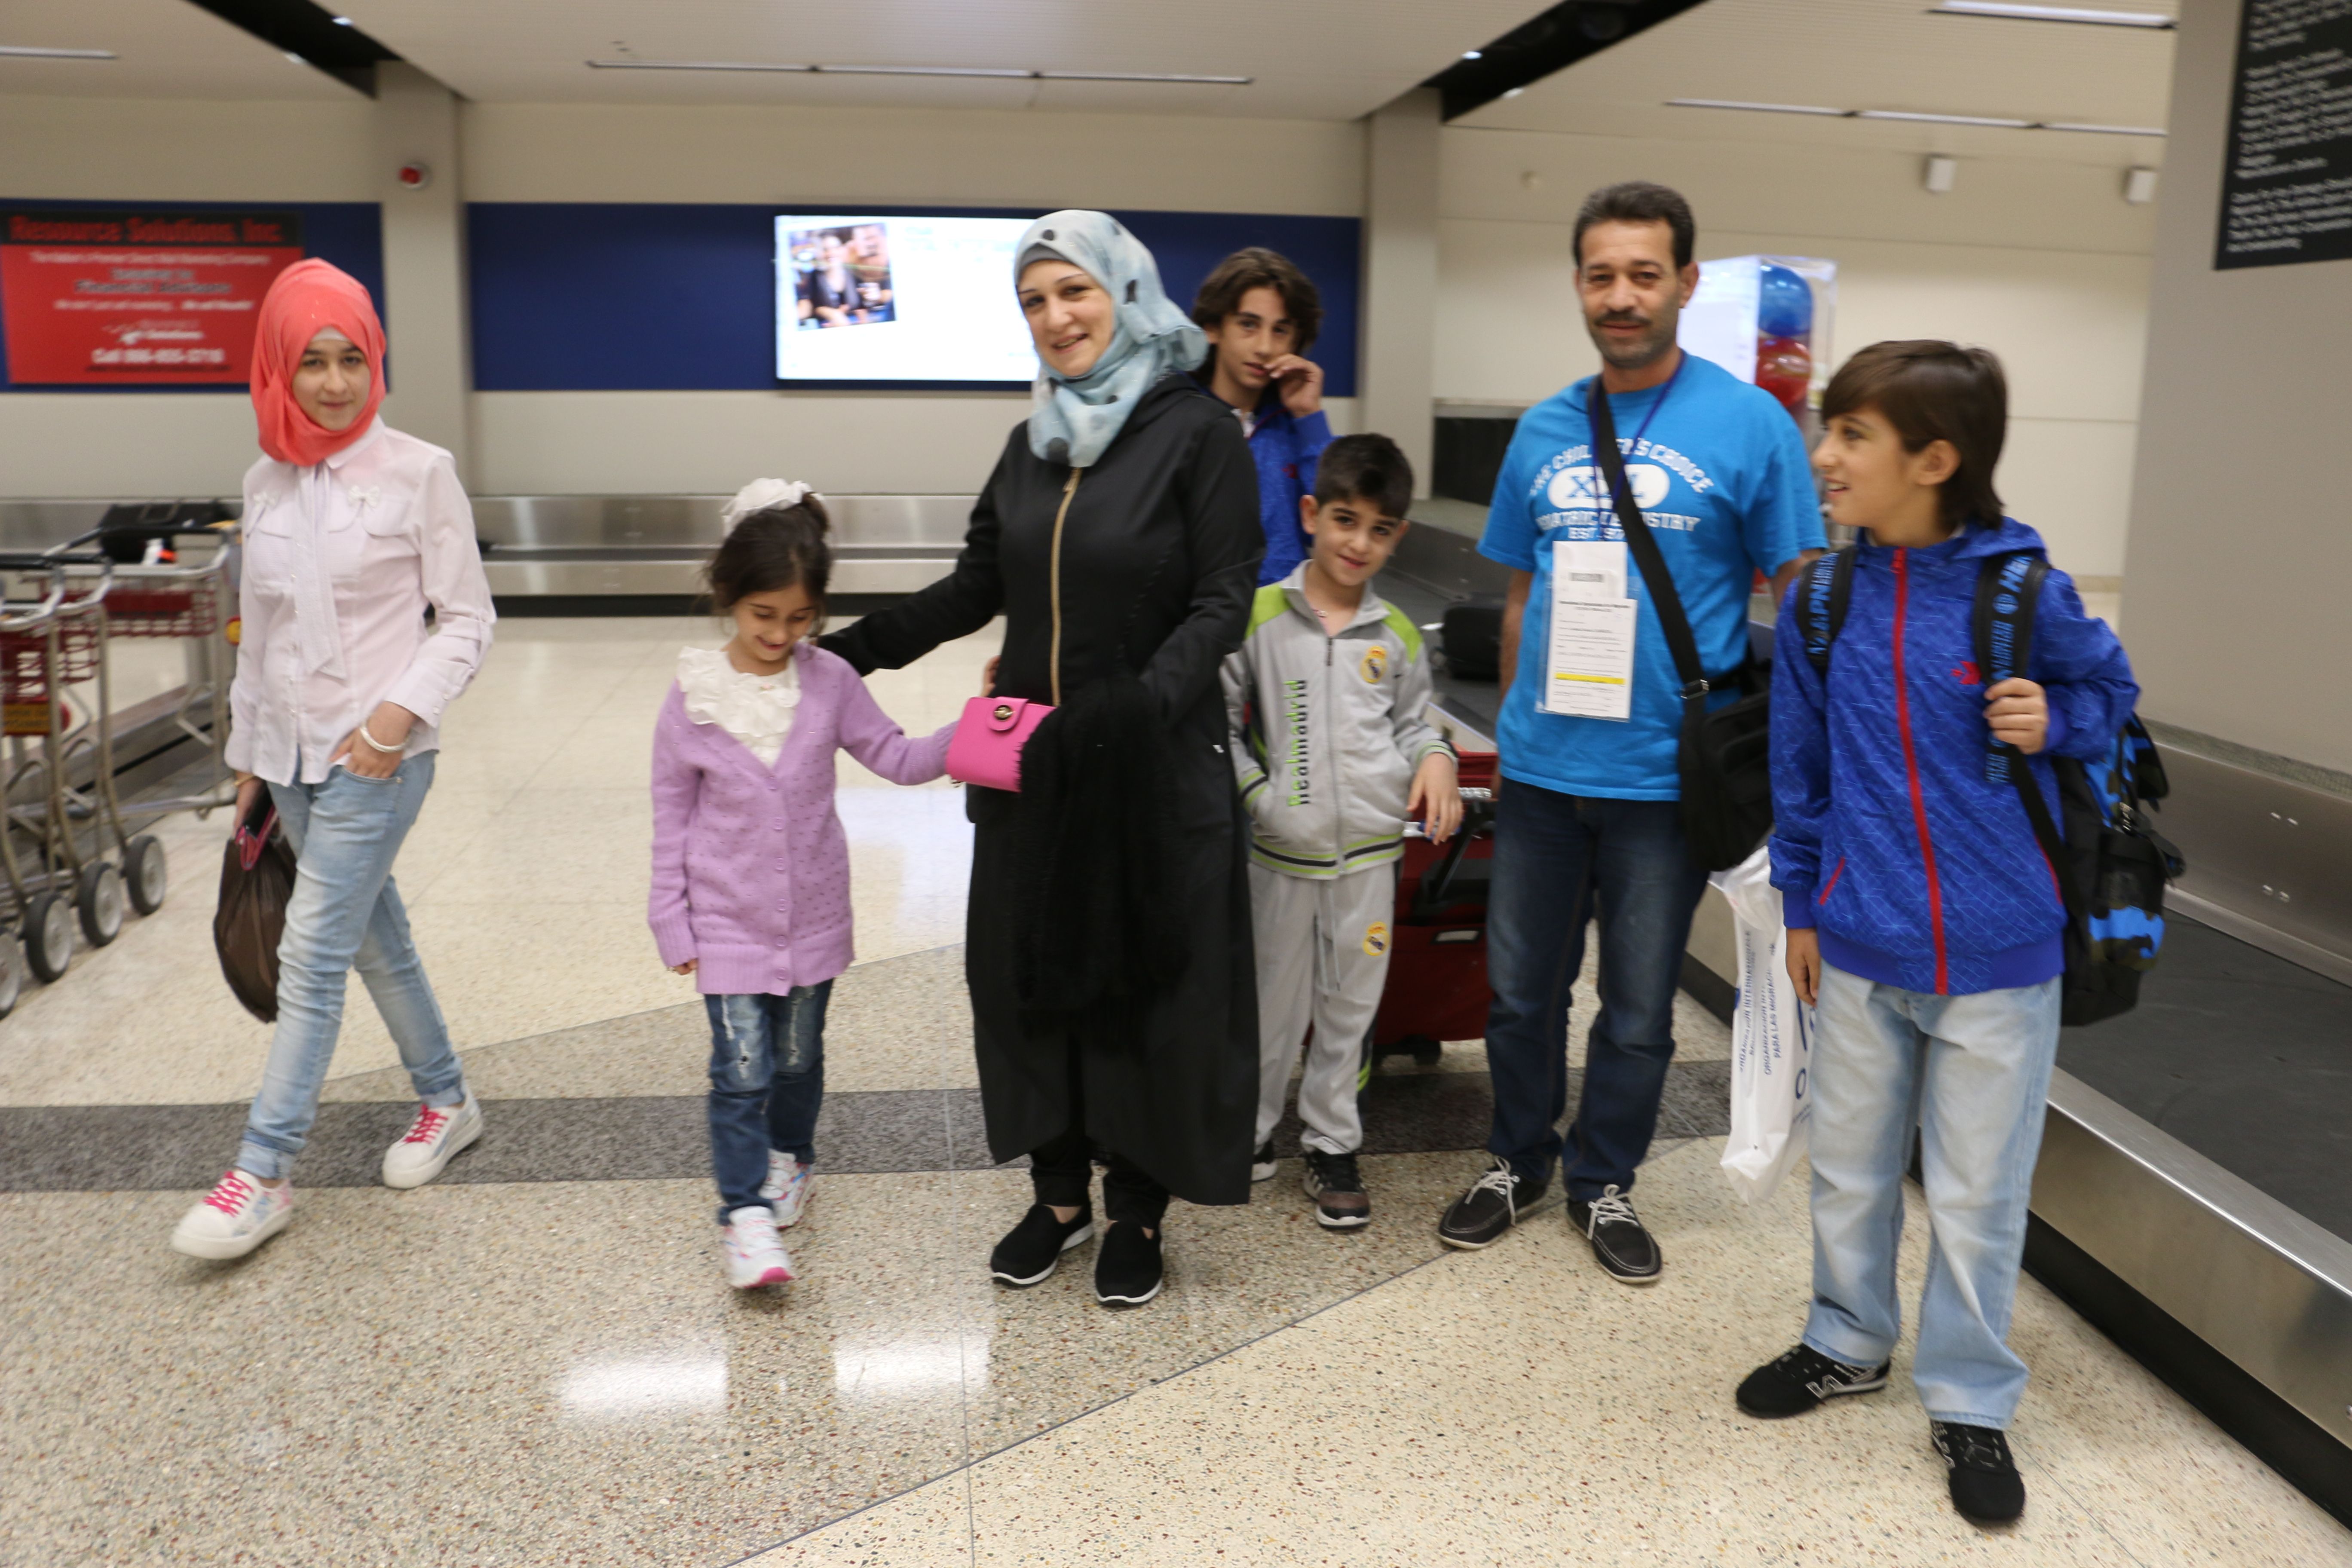 Ghazweh Aljabooli and her husband and five children arrive in the Des Moines airport just before midnight one night in June 2016.